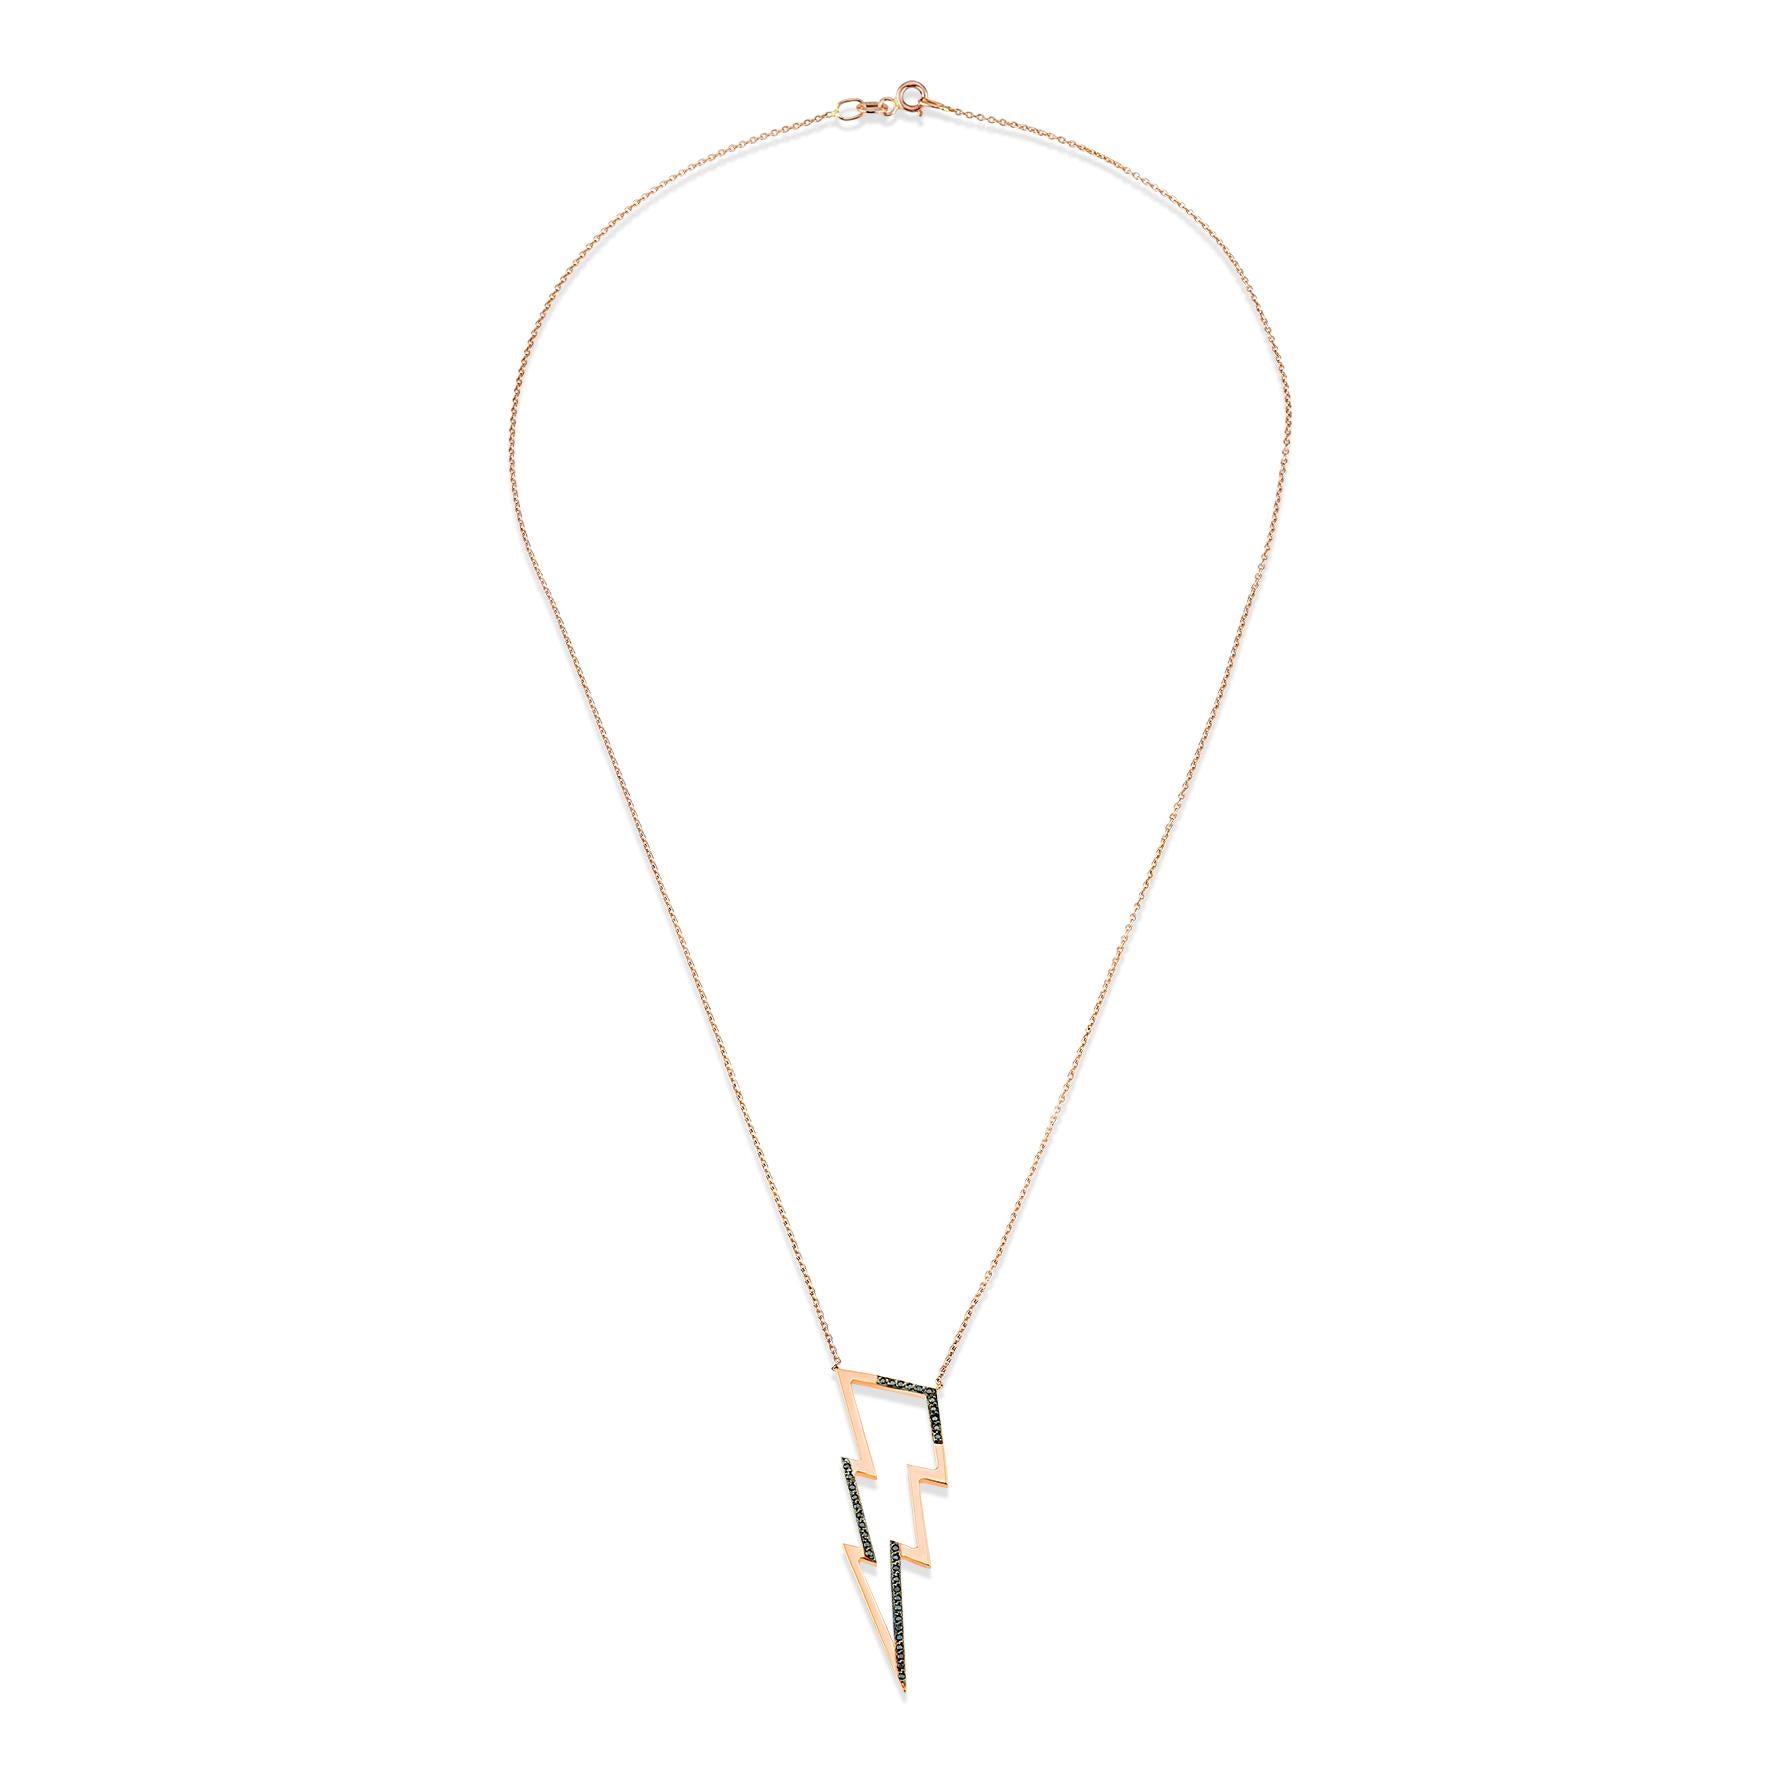 Black Diamond Hollow Lightning Necklace İn 14K Rose Gold By Selda Jewellery

Additional Information:-
Collection: Thunder collection
14K Rose Gold
0.17Ct Black Diamond
Lightning Height 4Cm
Chain Length 44Cm